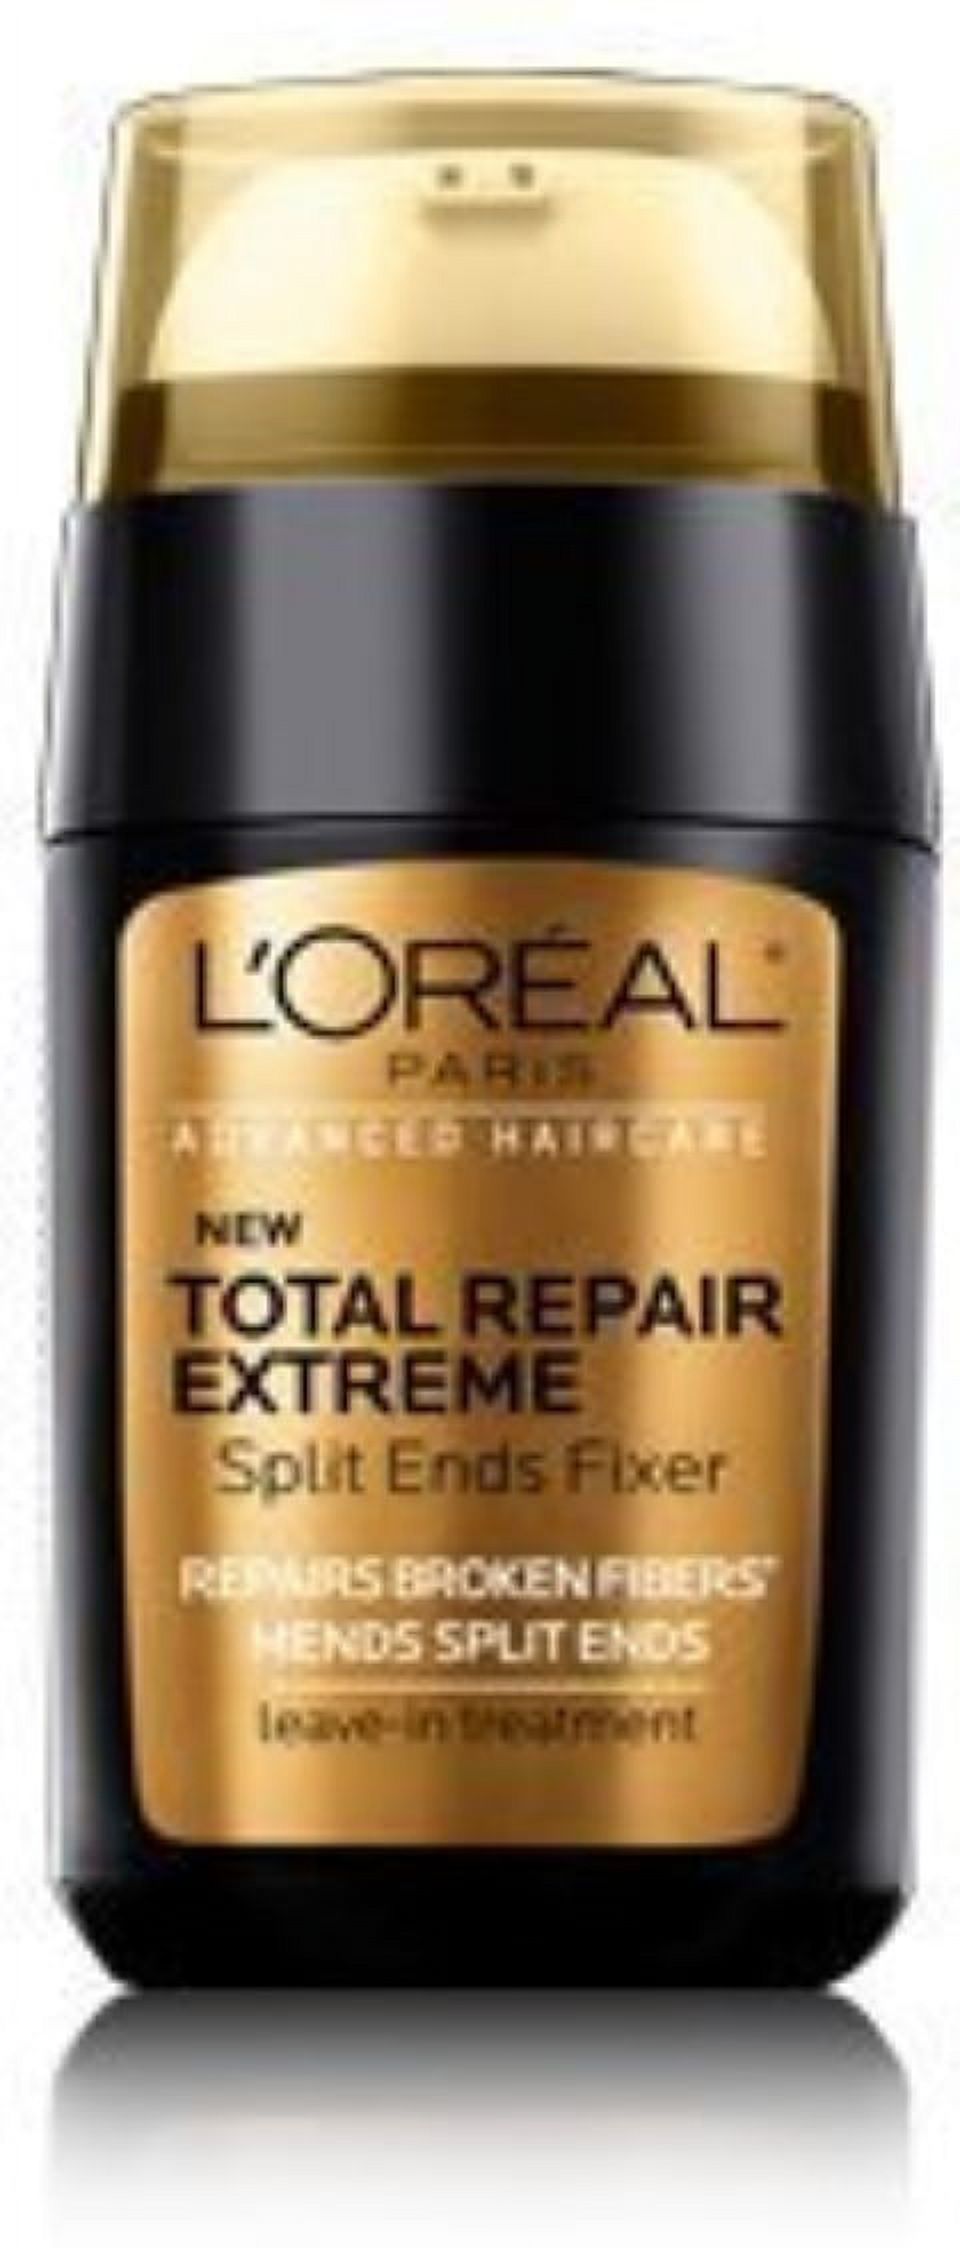 L'Oreal Advanced Haircare Total Repair Extreme Split Ends Fixer Leave-In Treatment 0.50 oz - image 1 of 5